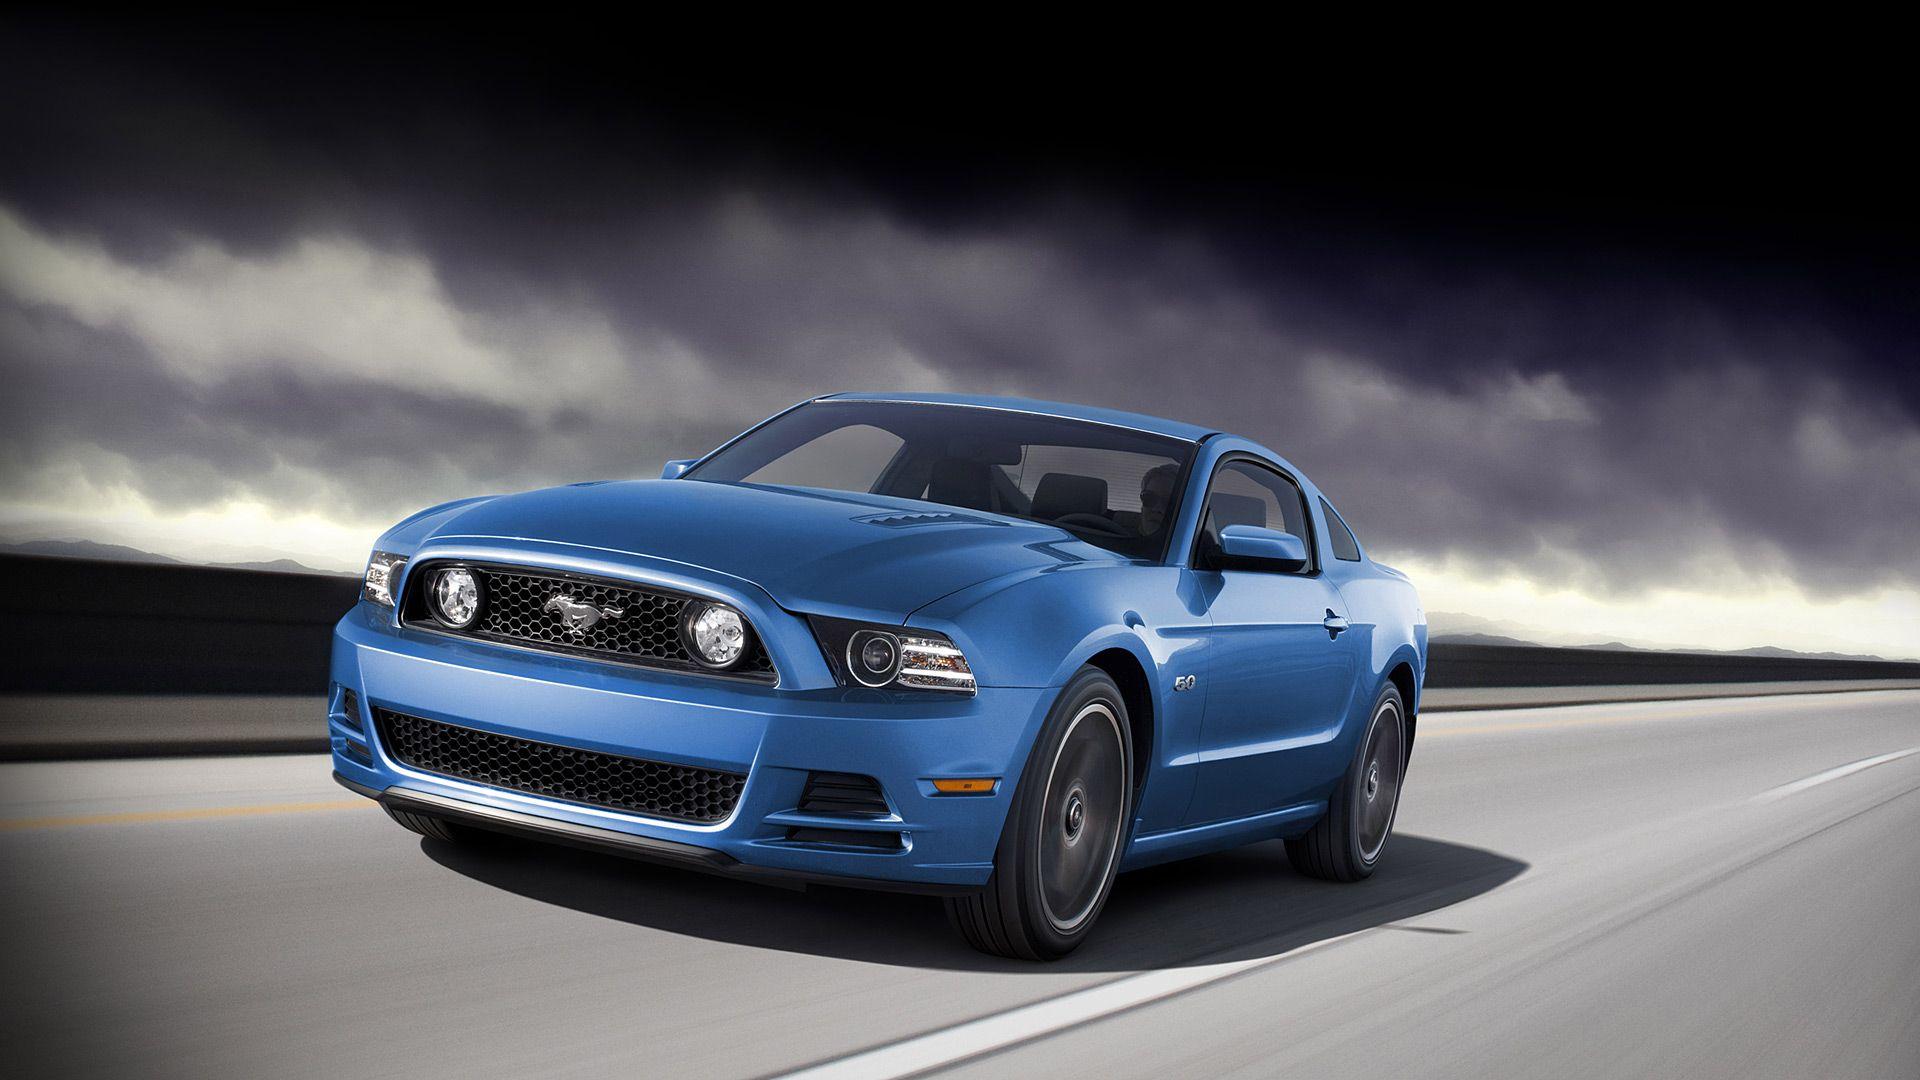 2014 Mustang Wallpapers Top Free 2014 Mustang Backgrounds Wallpaperaccess